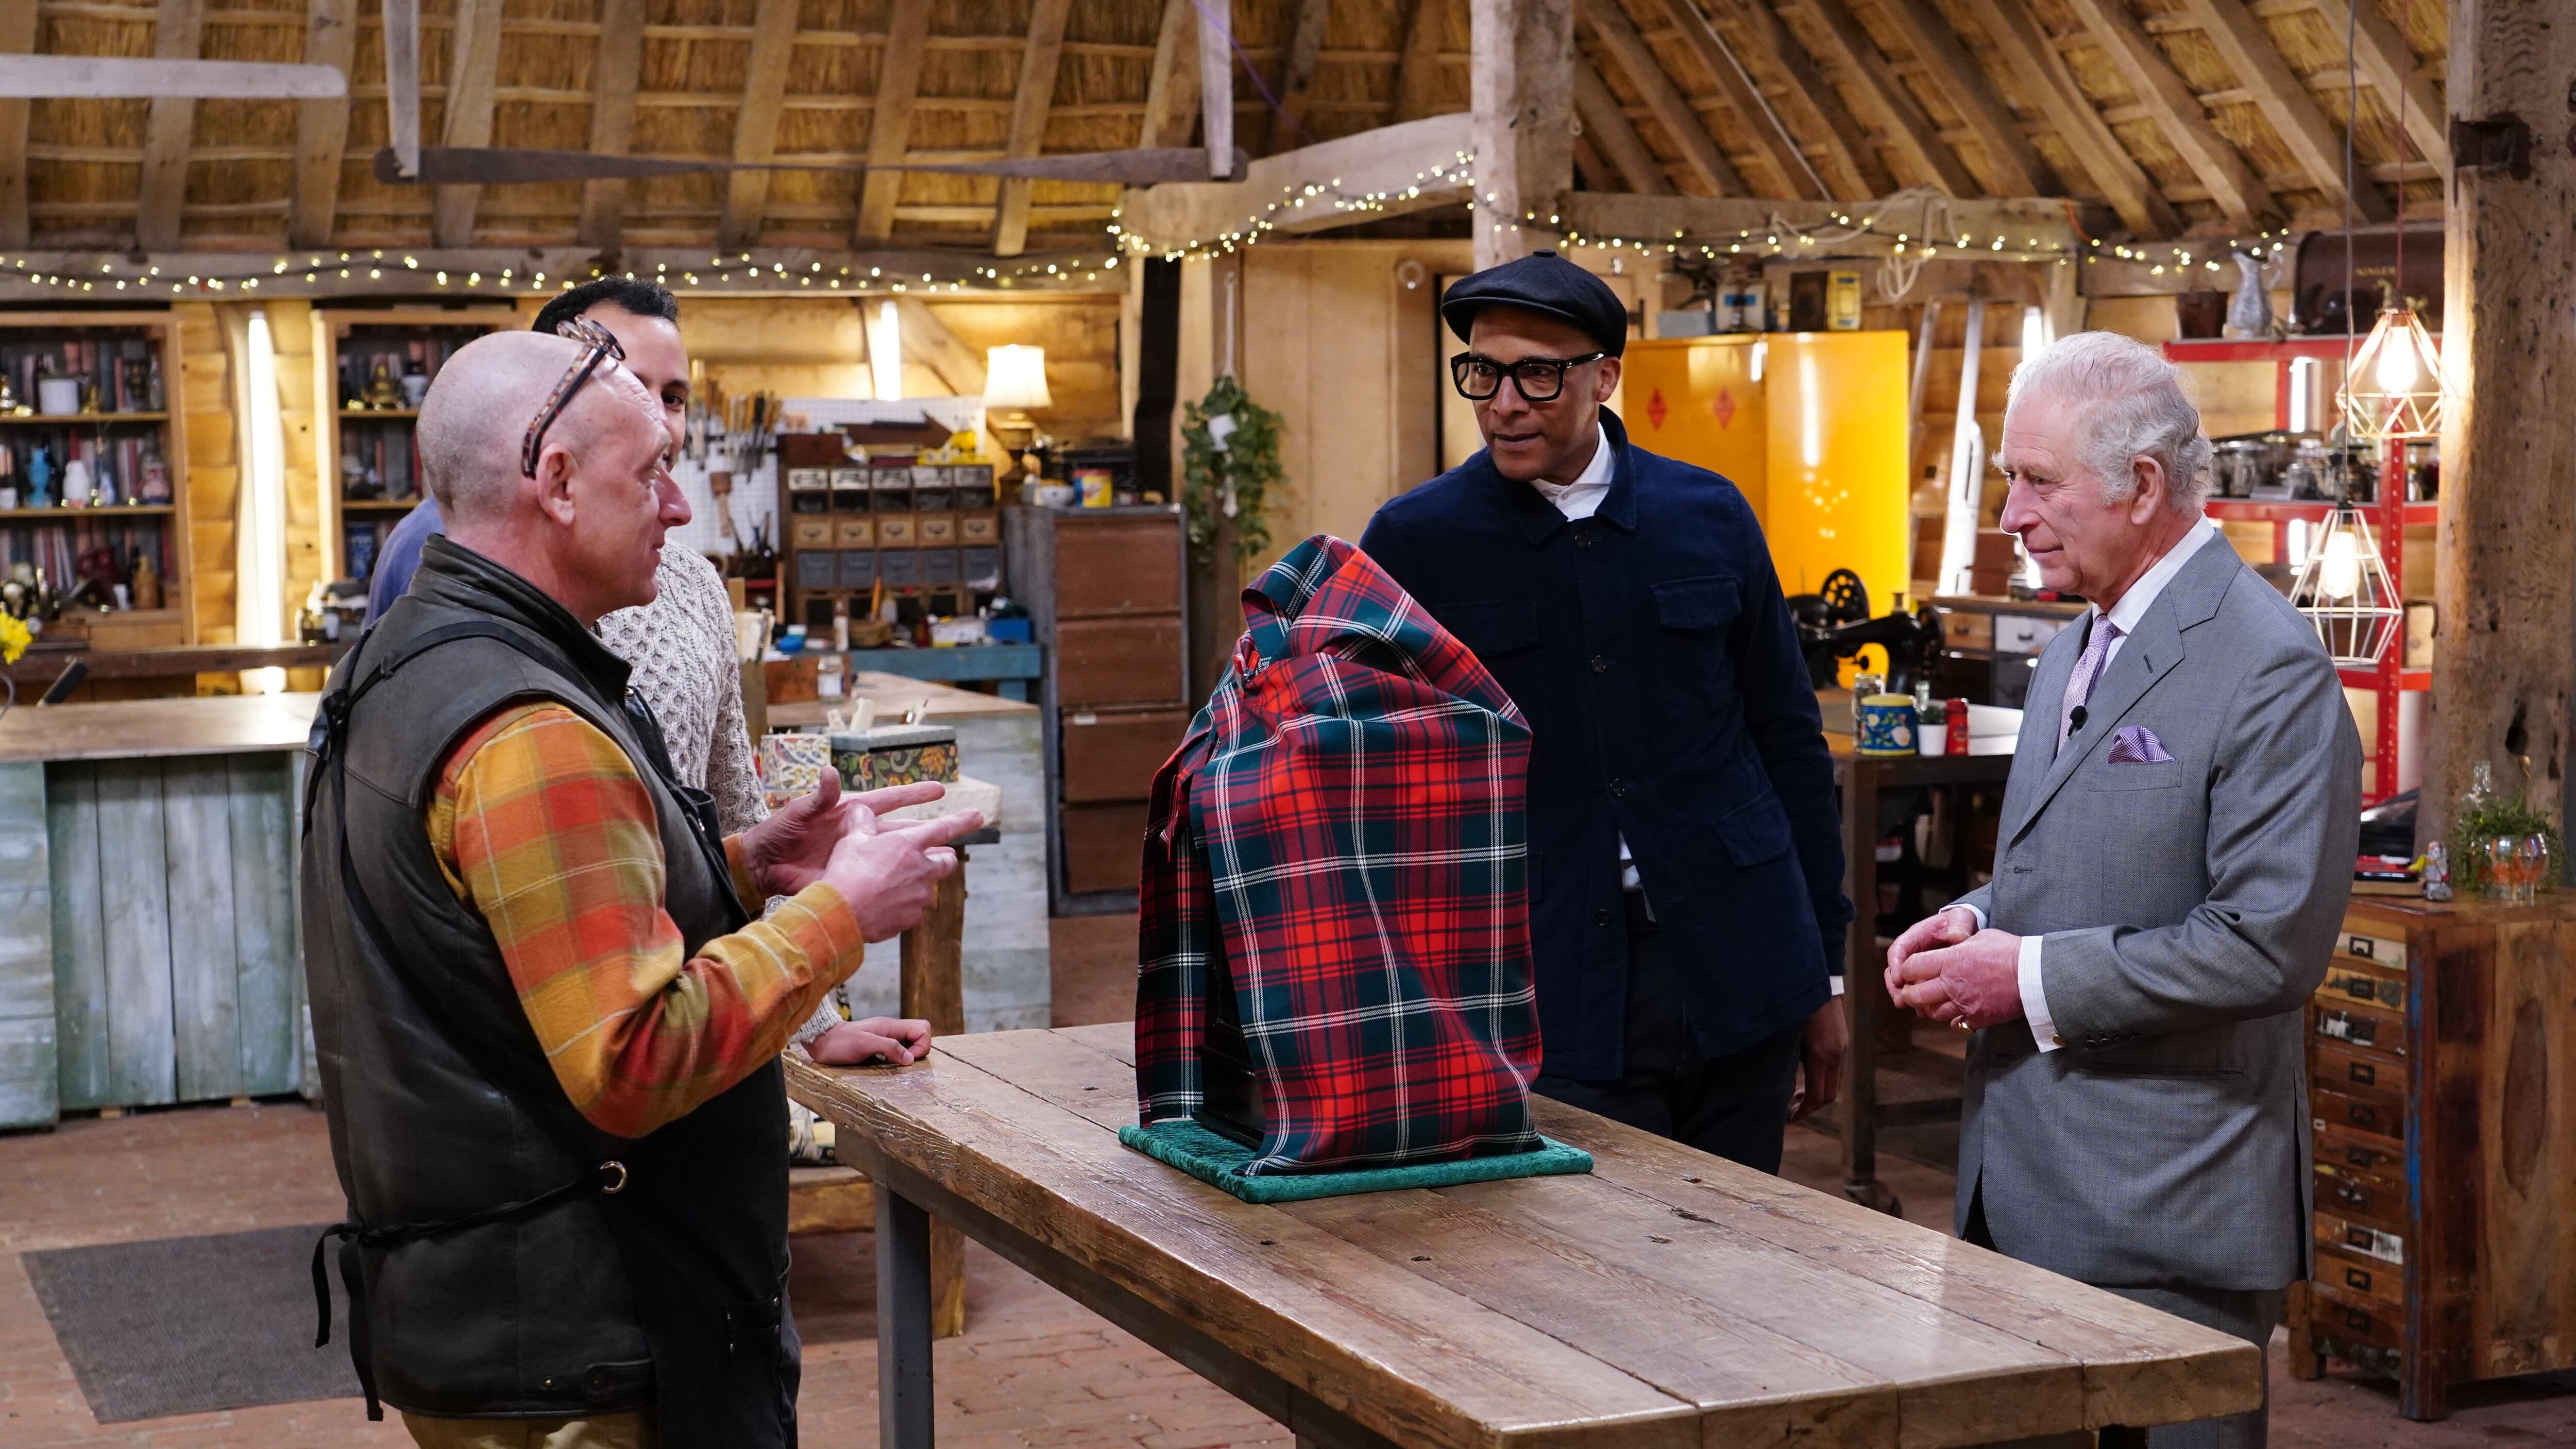 The Repair Shop: A Royal Visit aired on BBC One on Wednesday.